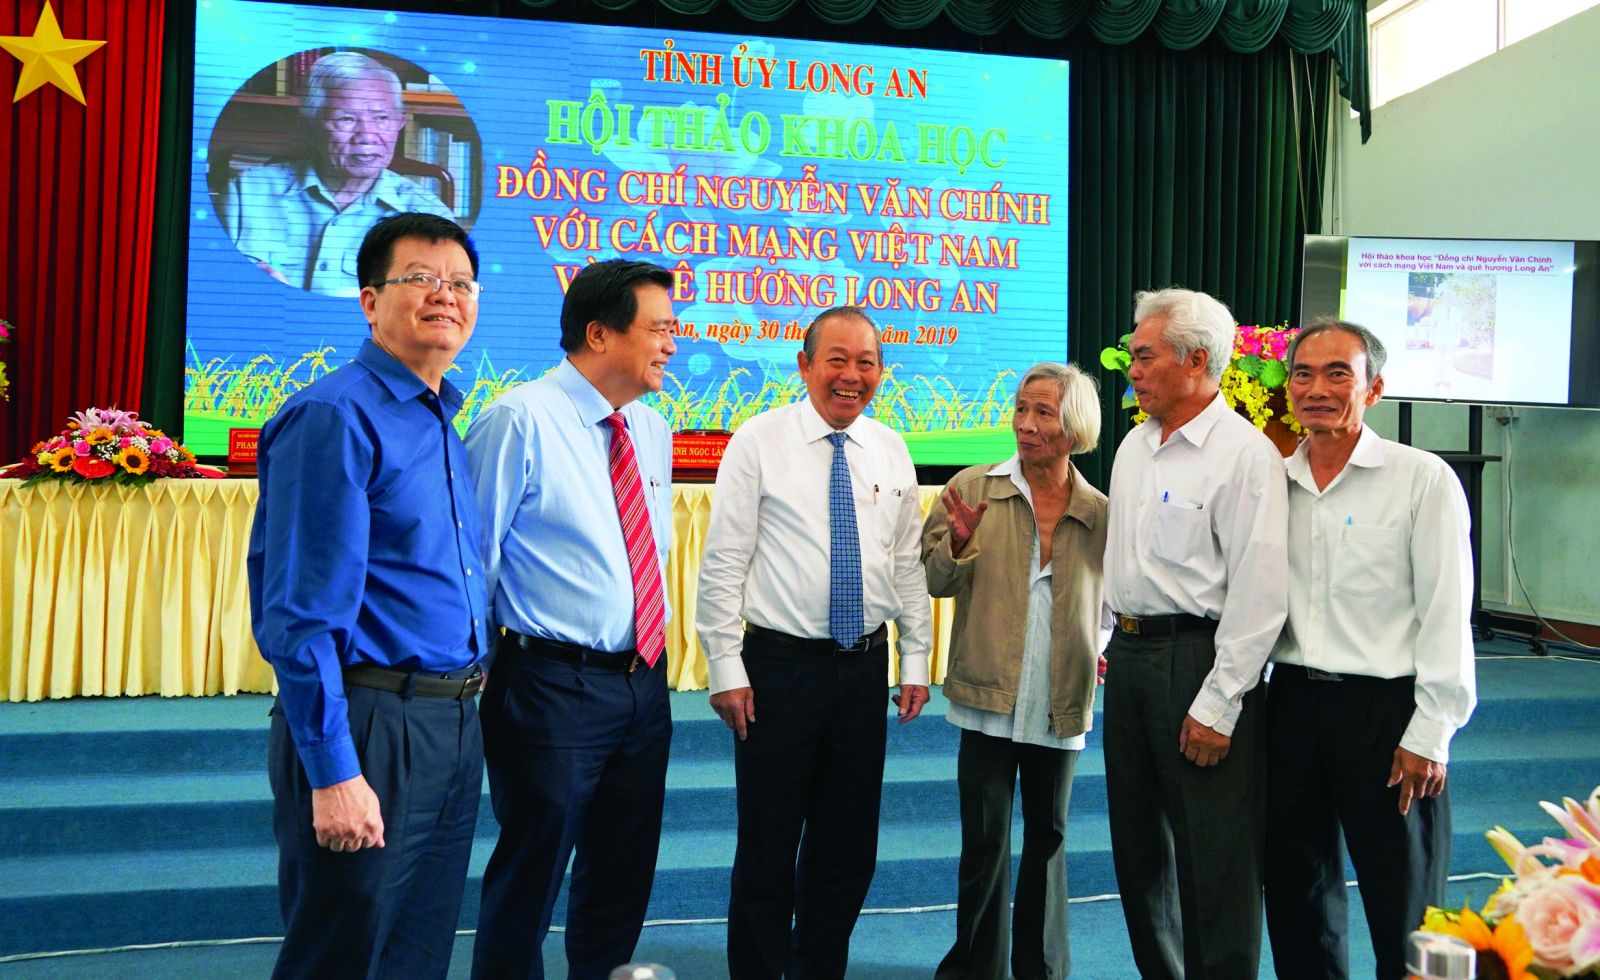 Central and provincial leaders discuss with Mr. Cao Tu Thanh (3rd,R), the eldest son of Mr. Chin Can